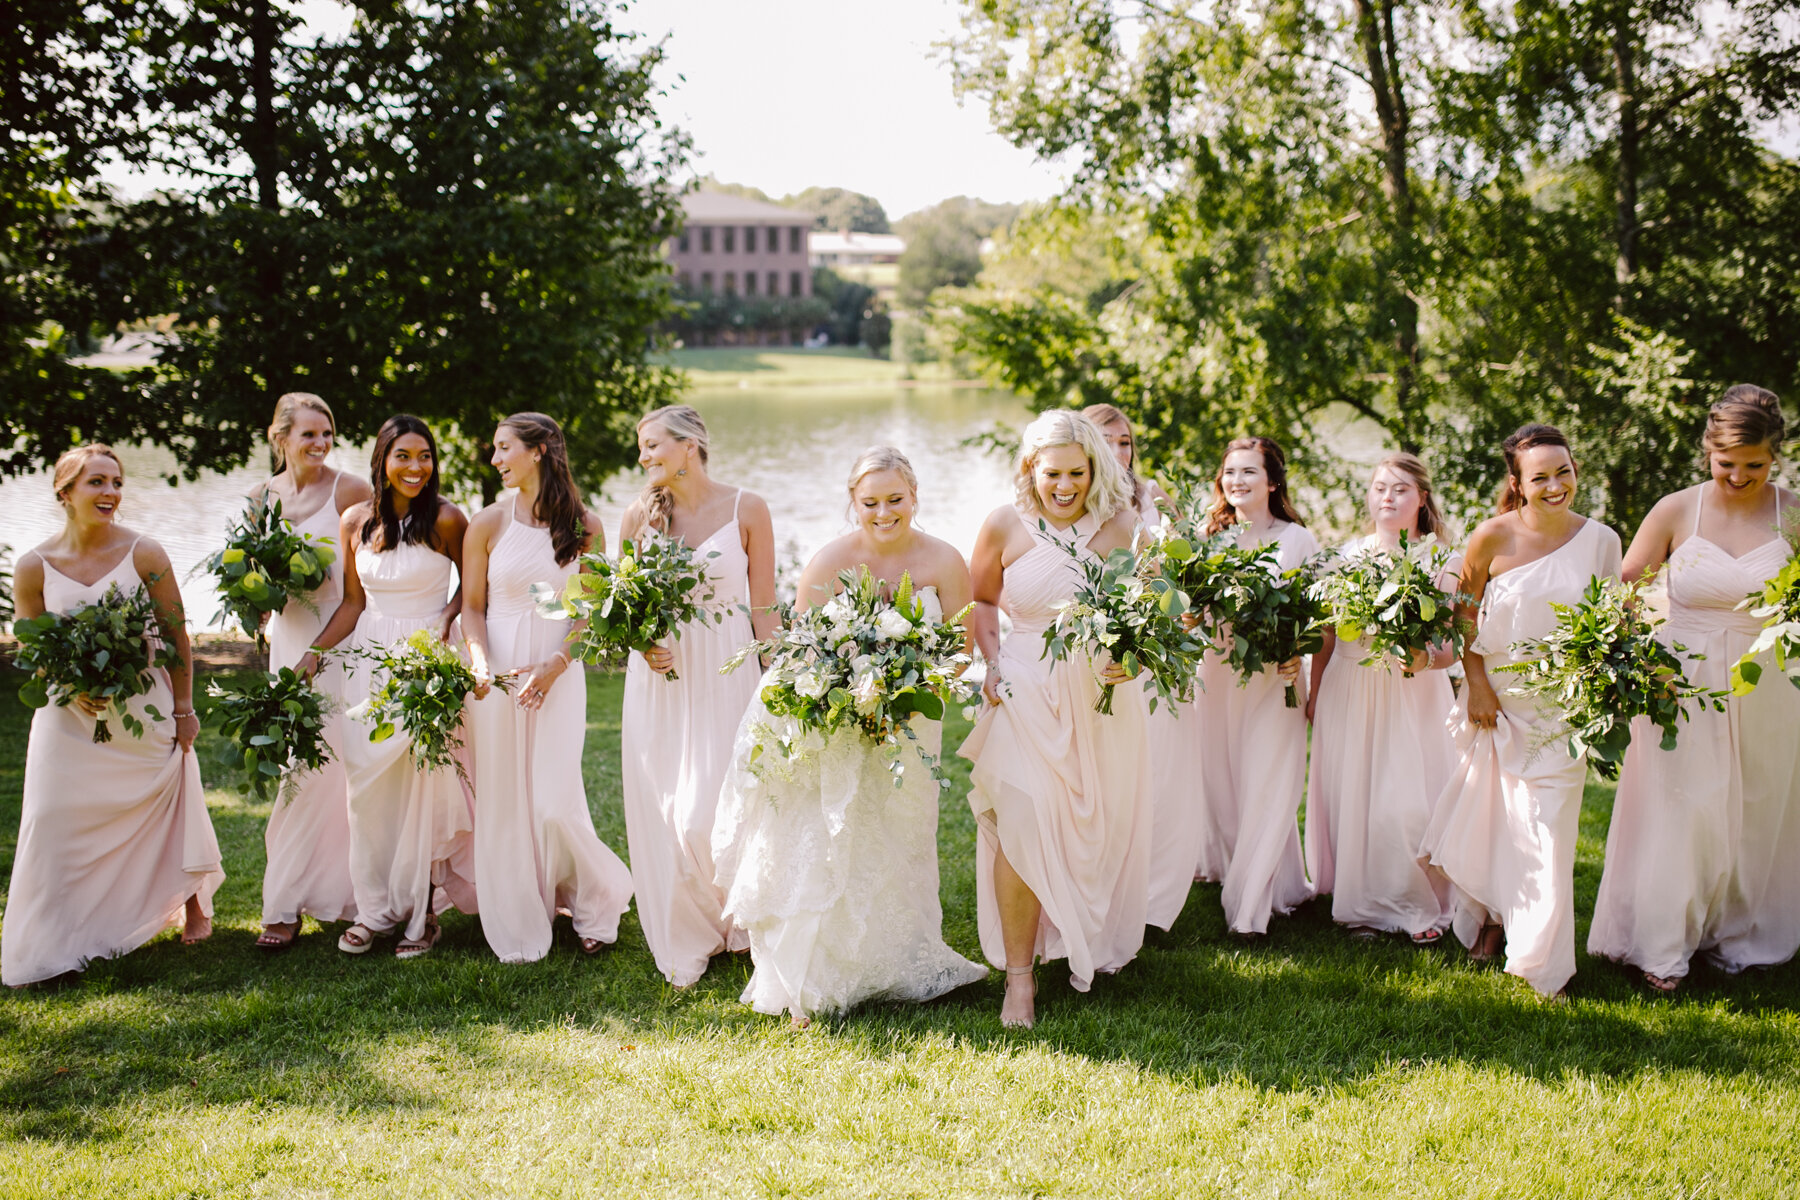 bridal party photos at a sunny outdoor wedding at hunter valley farms in knoxville tennessee